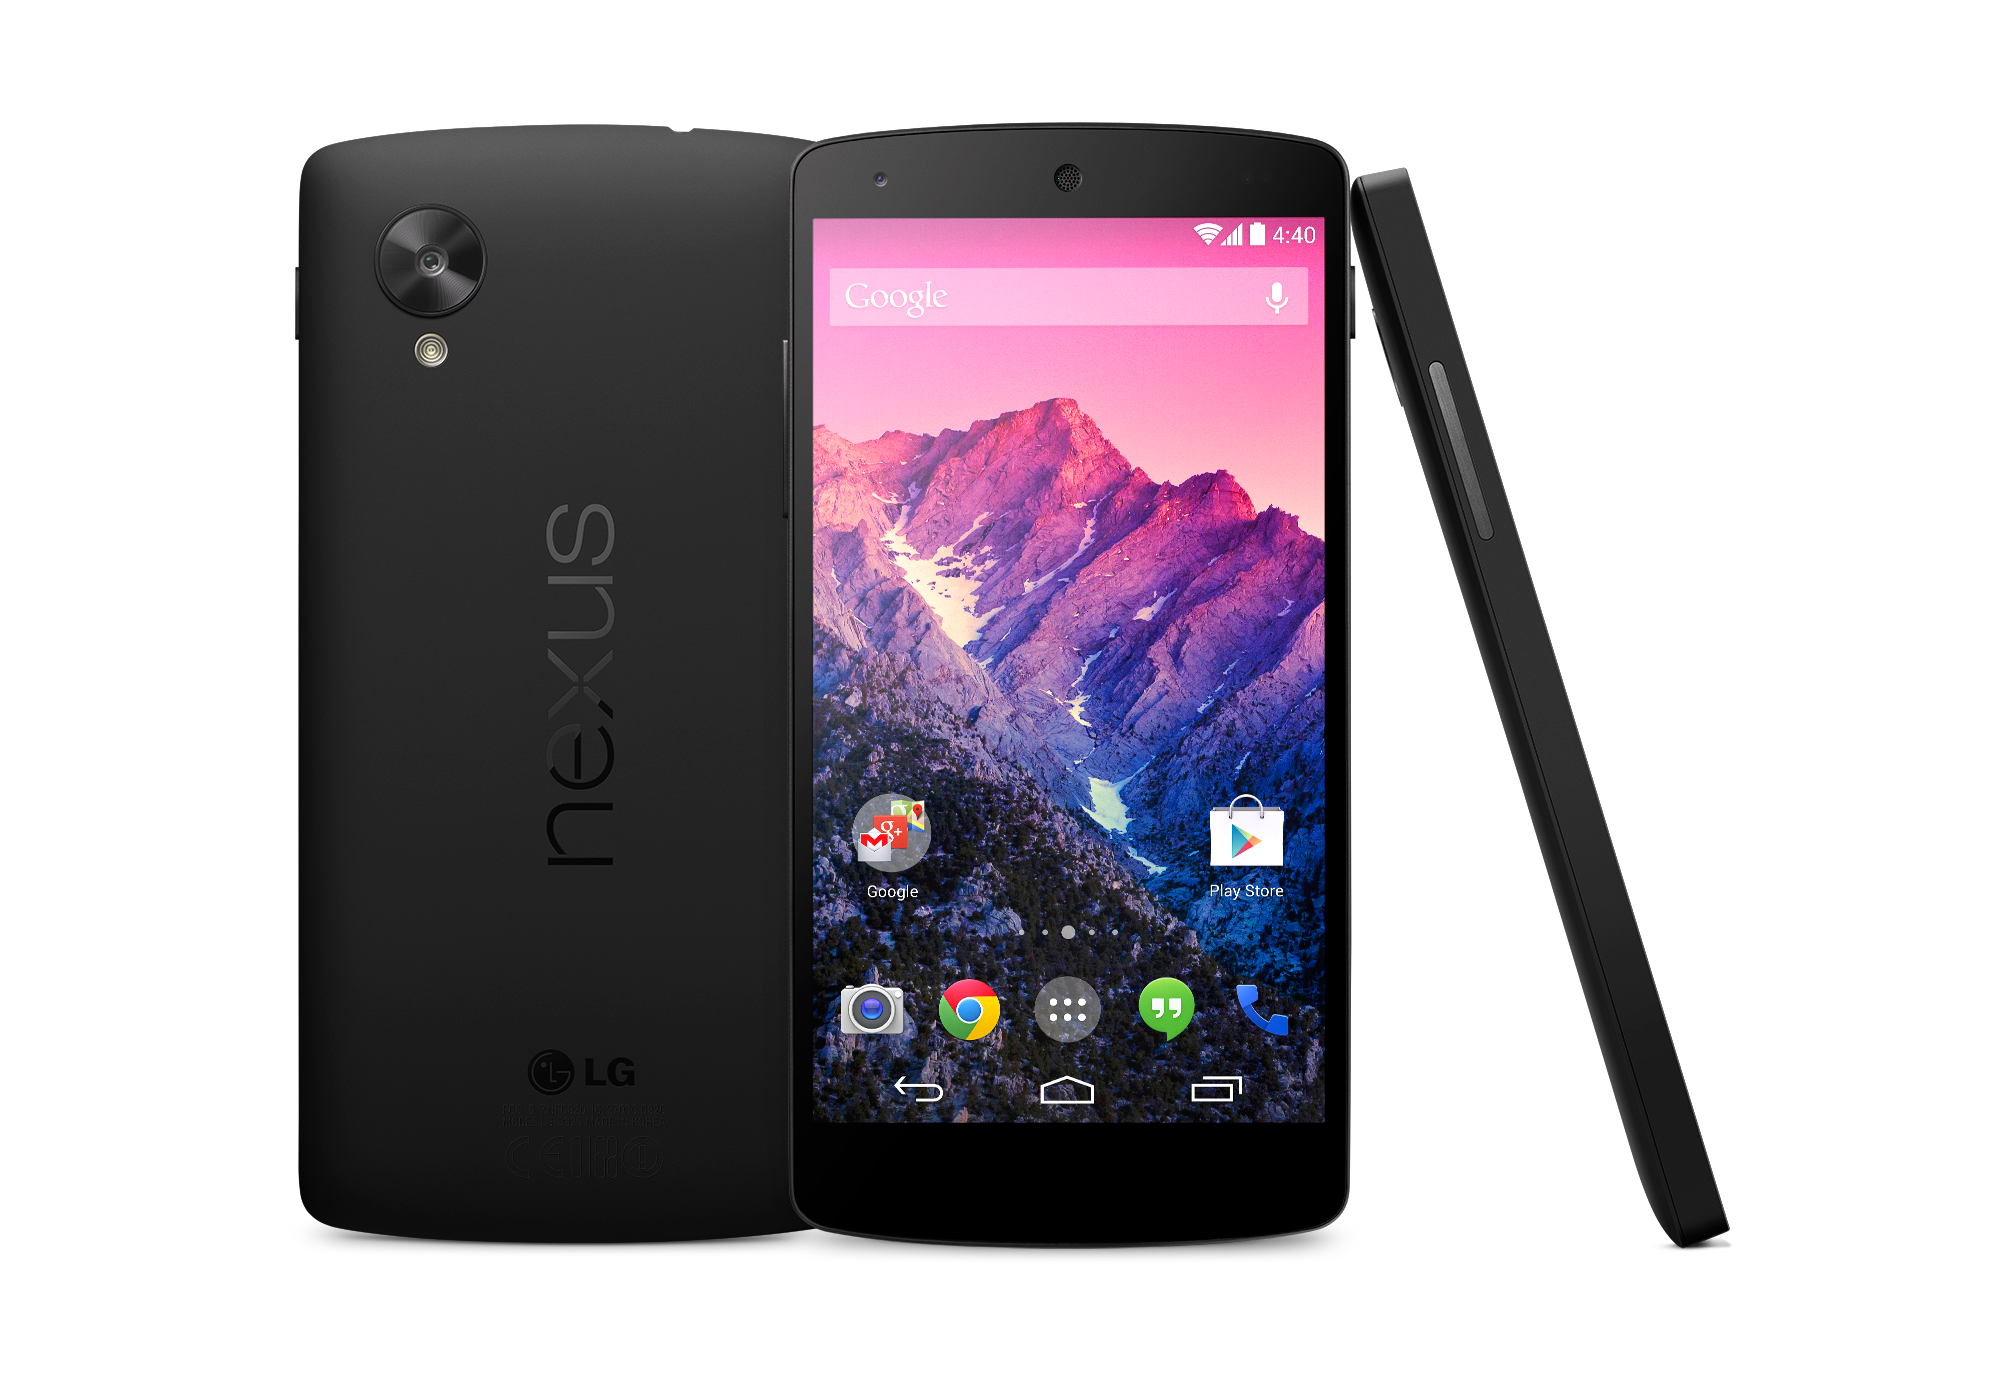 LG and Google Partner for Nexus 5, Launching Exclusively with Smart (Update)